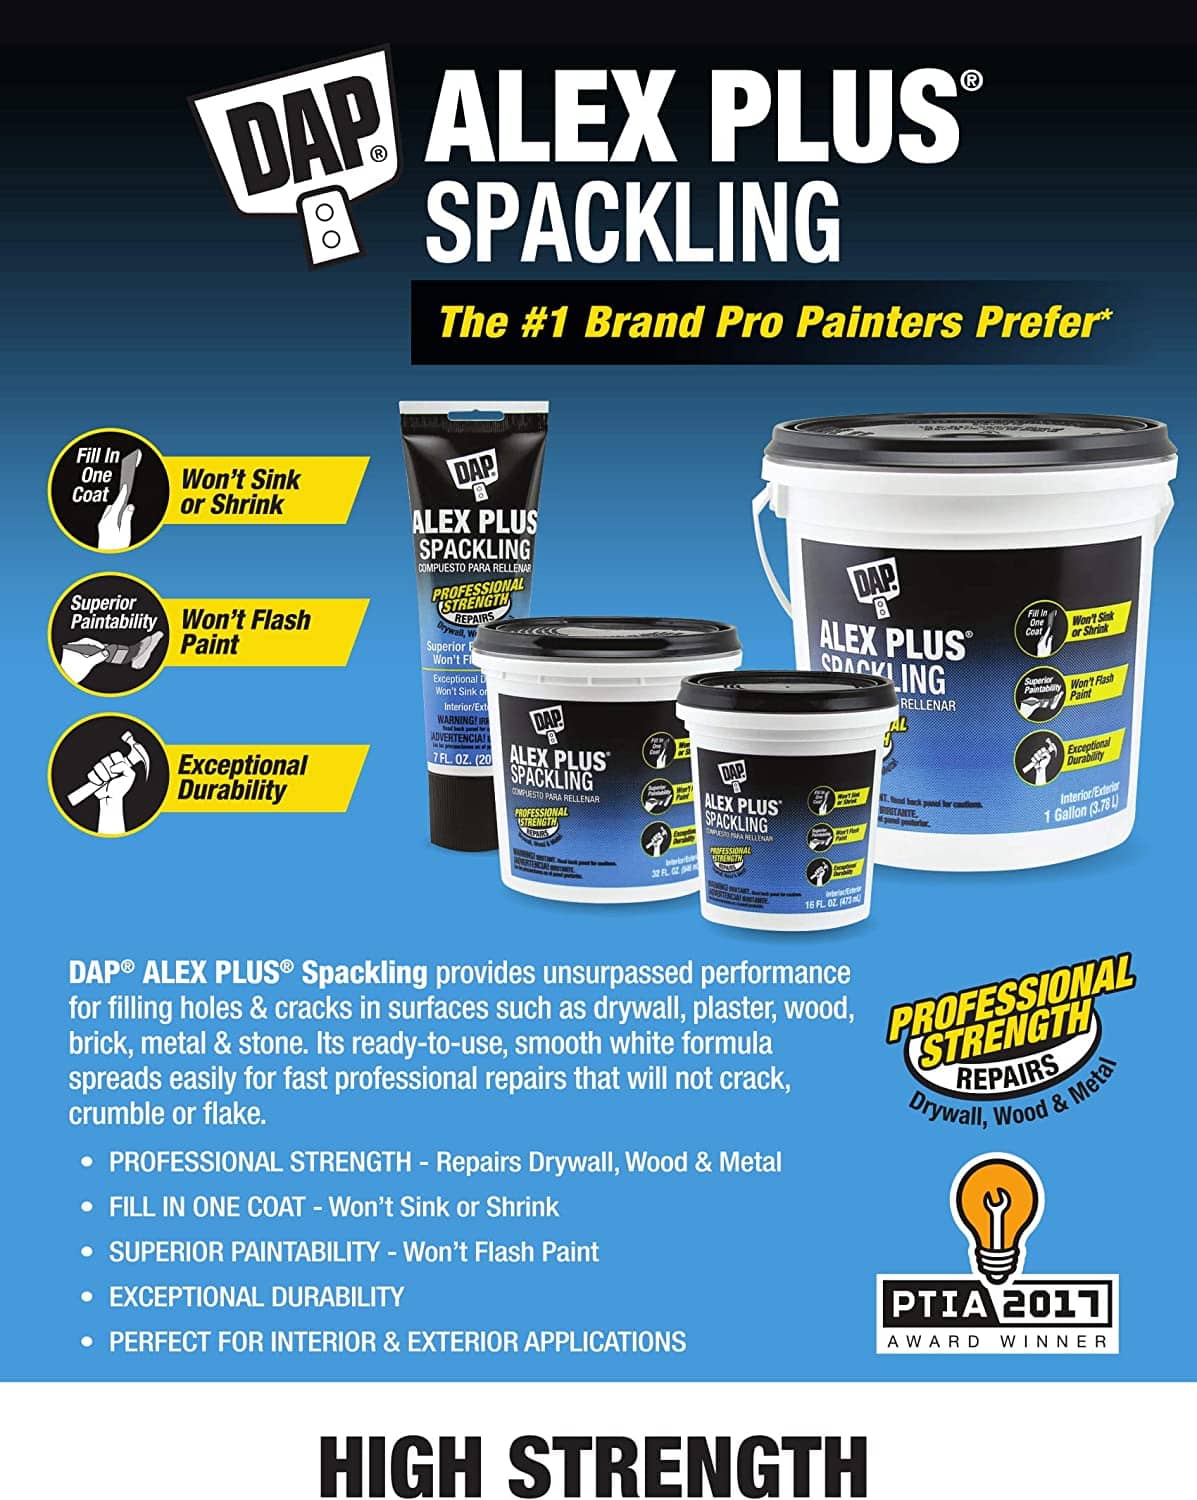 DAP Alex Plus Ready to Use Spackling Compound 1 gal. | Gilford Hardware 